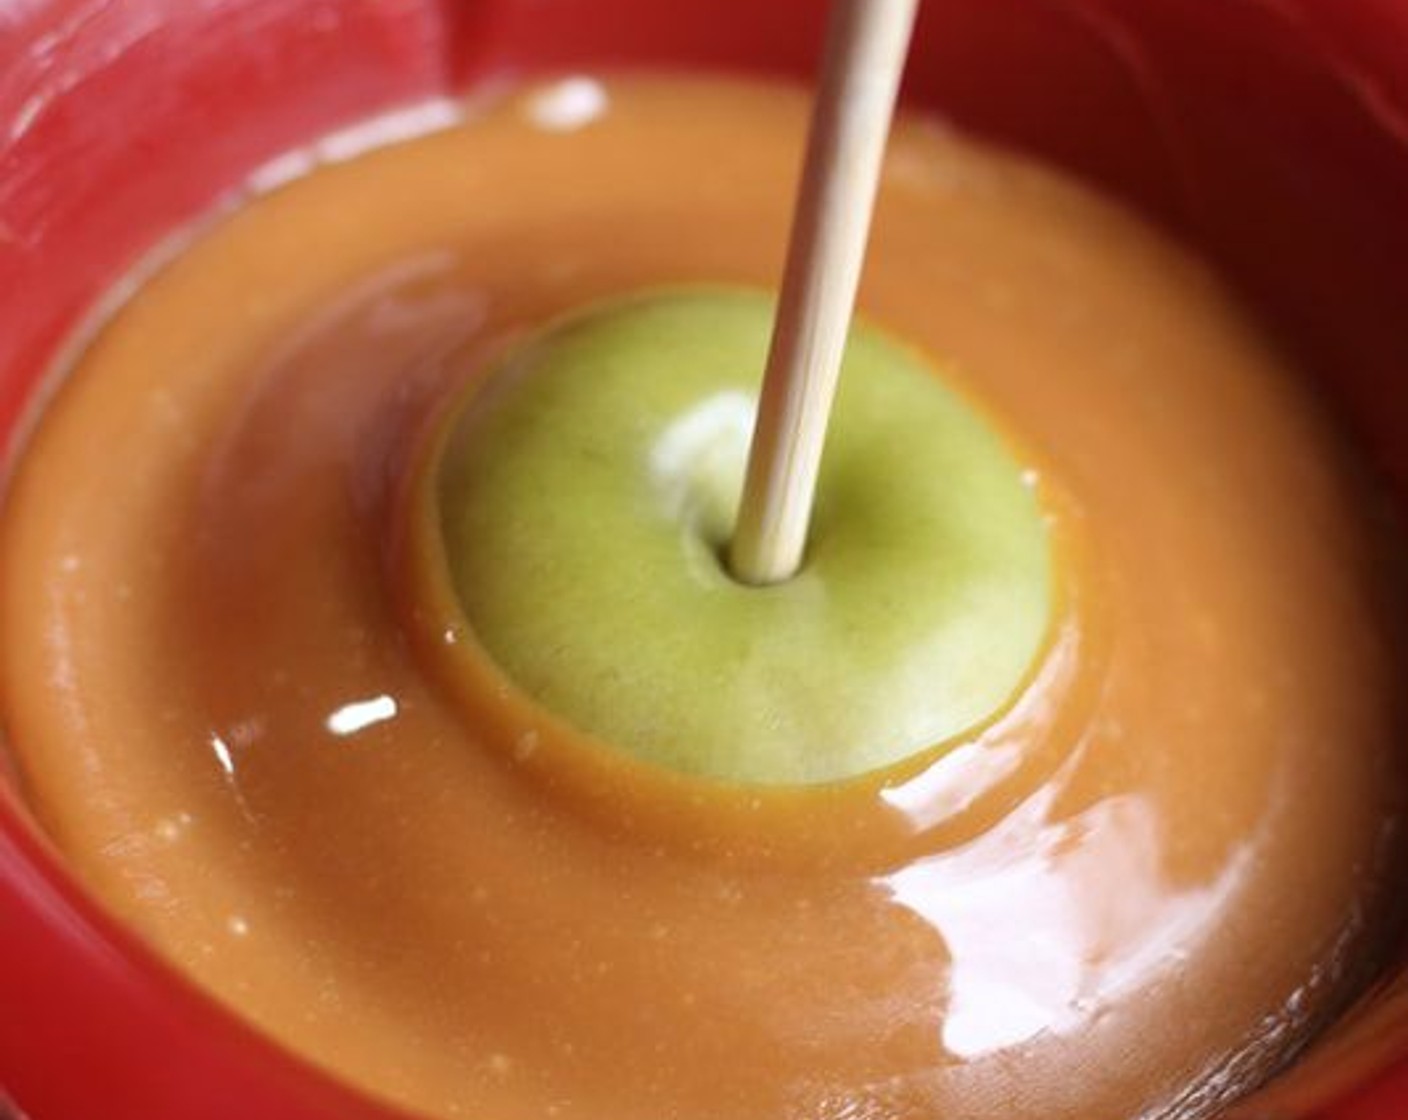 step 9 Dip apples one at a time into caramel on an angle so it covers nearly to the top center. Rotate and turn to coat apple. Lift apple and let excess runoff, then run bottom of apple along the inside edge of the bowl to remove excess caramel. Lift apple and turn apple upside down to let caramel run up the apple a little, hold this way for about 30 seconds.